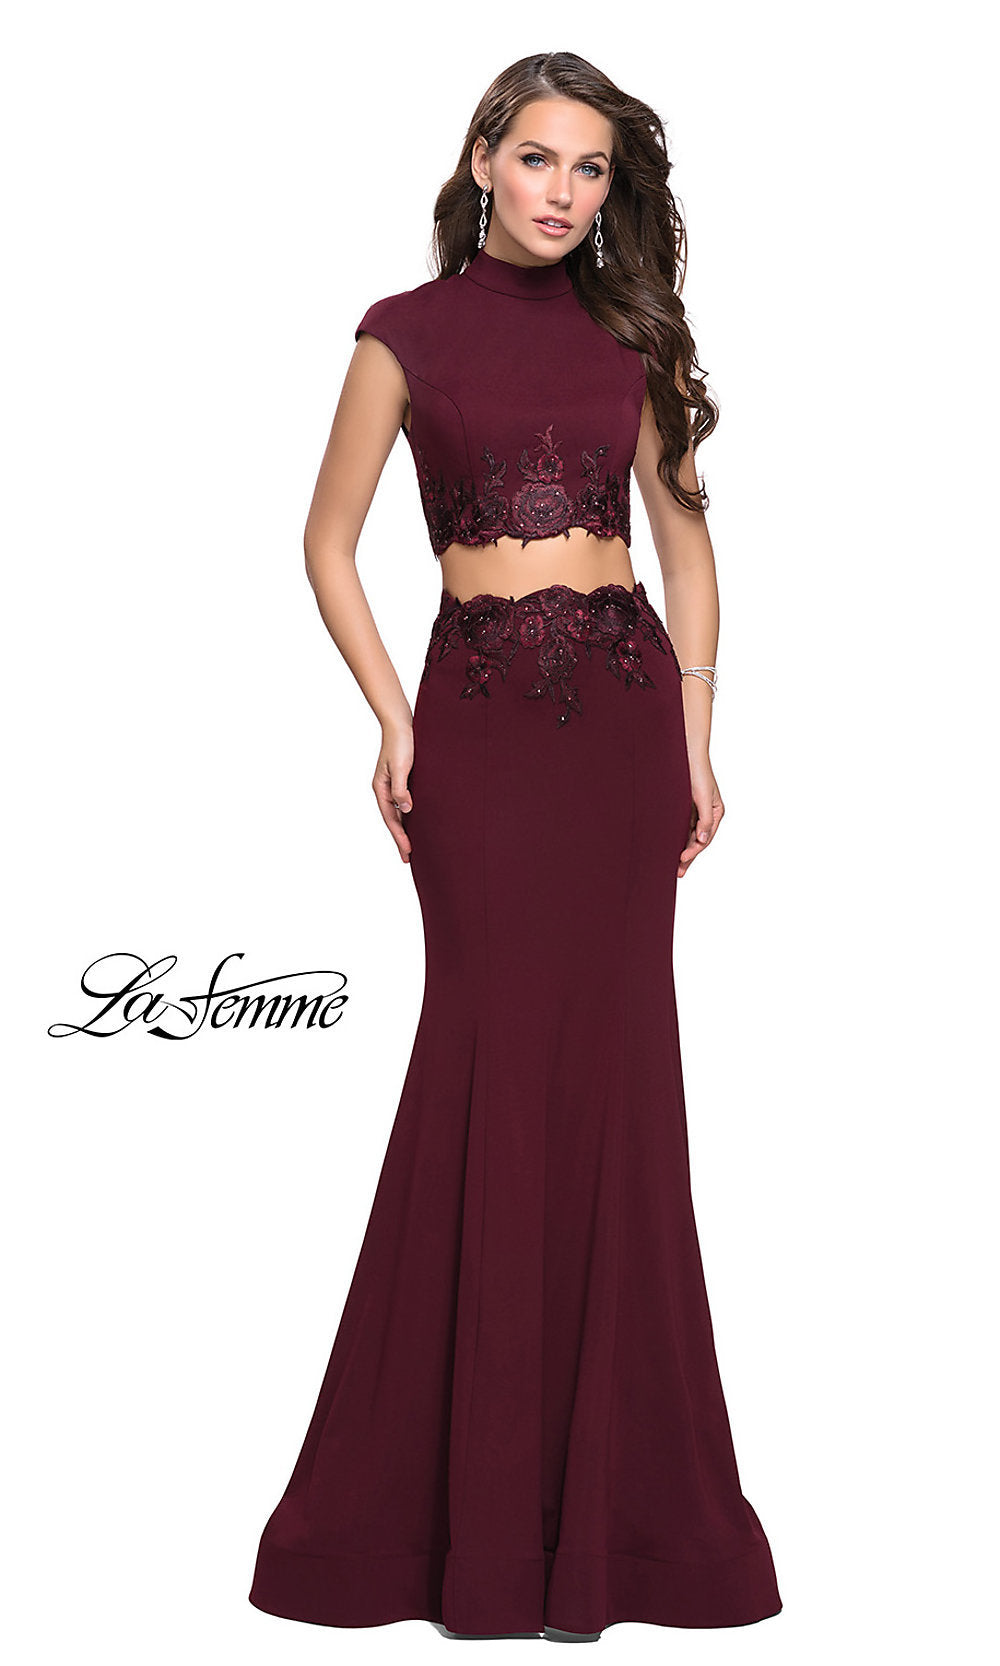 Wine Mock-Neck Two-Piece Prom Dress with Cap Sleeves